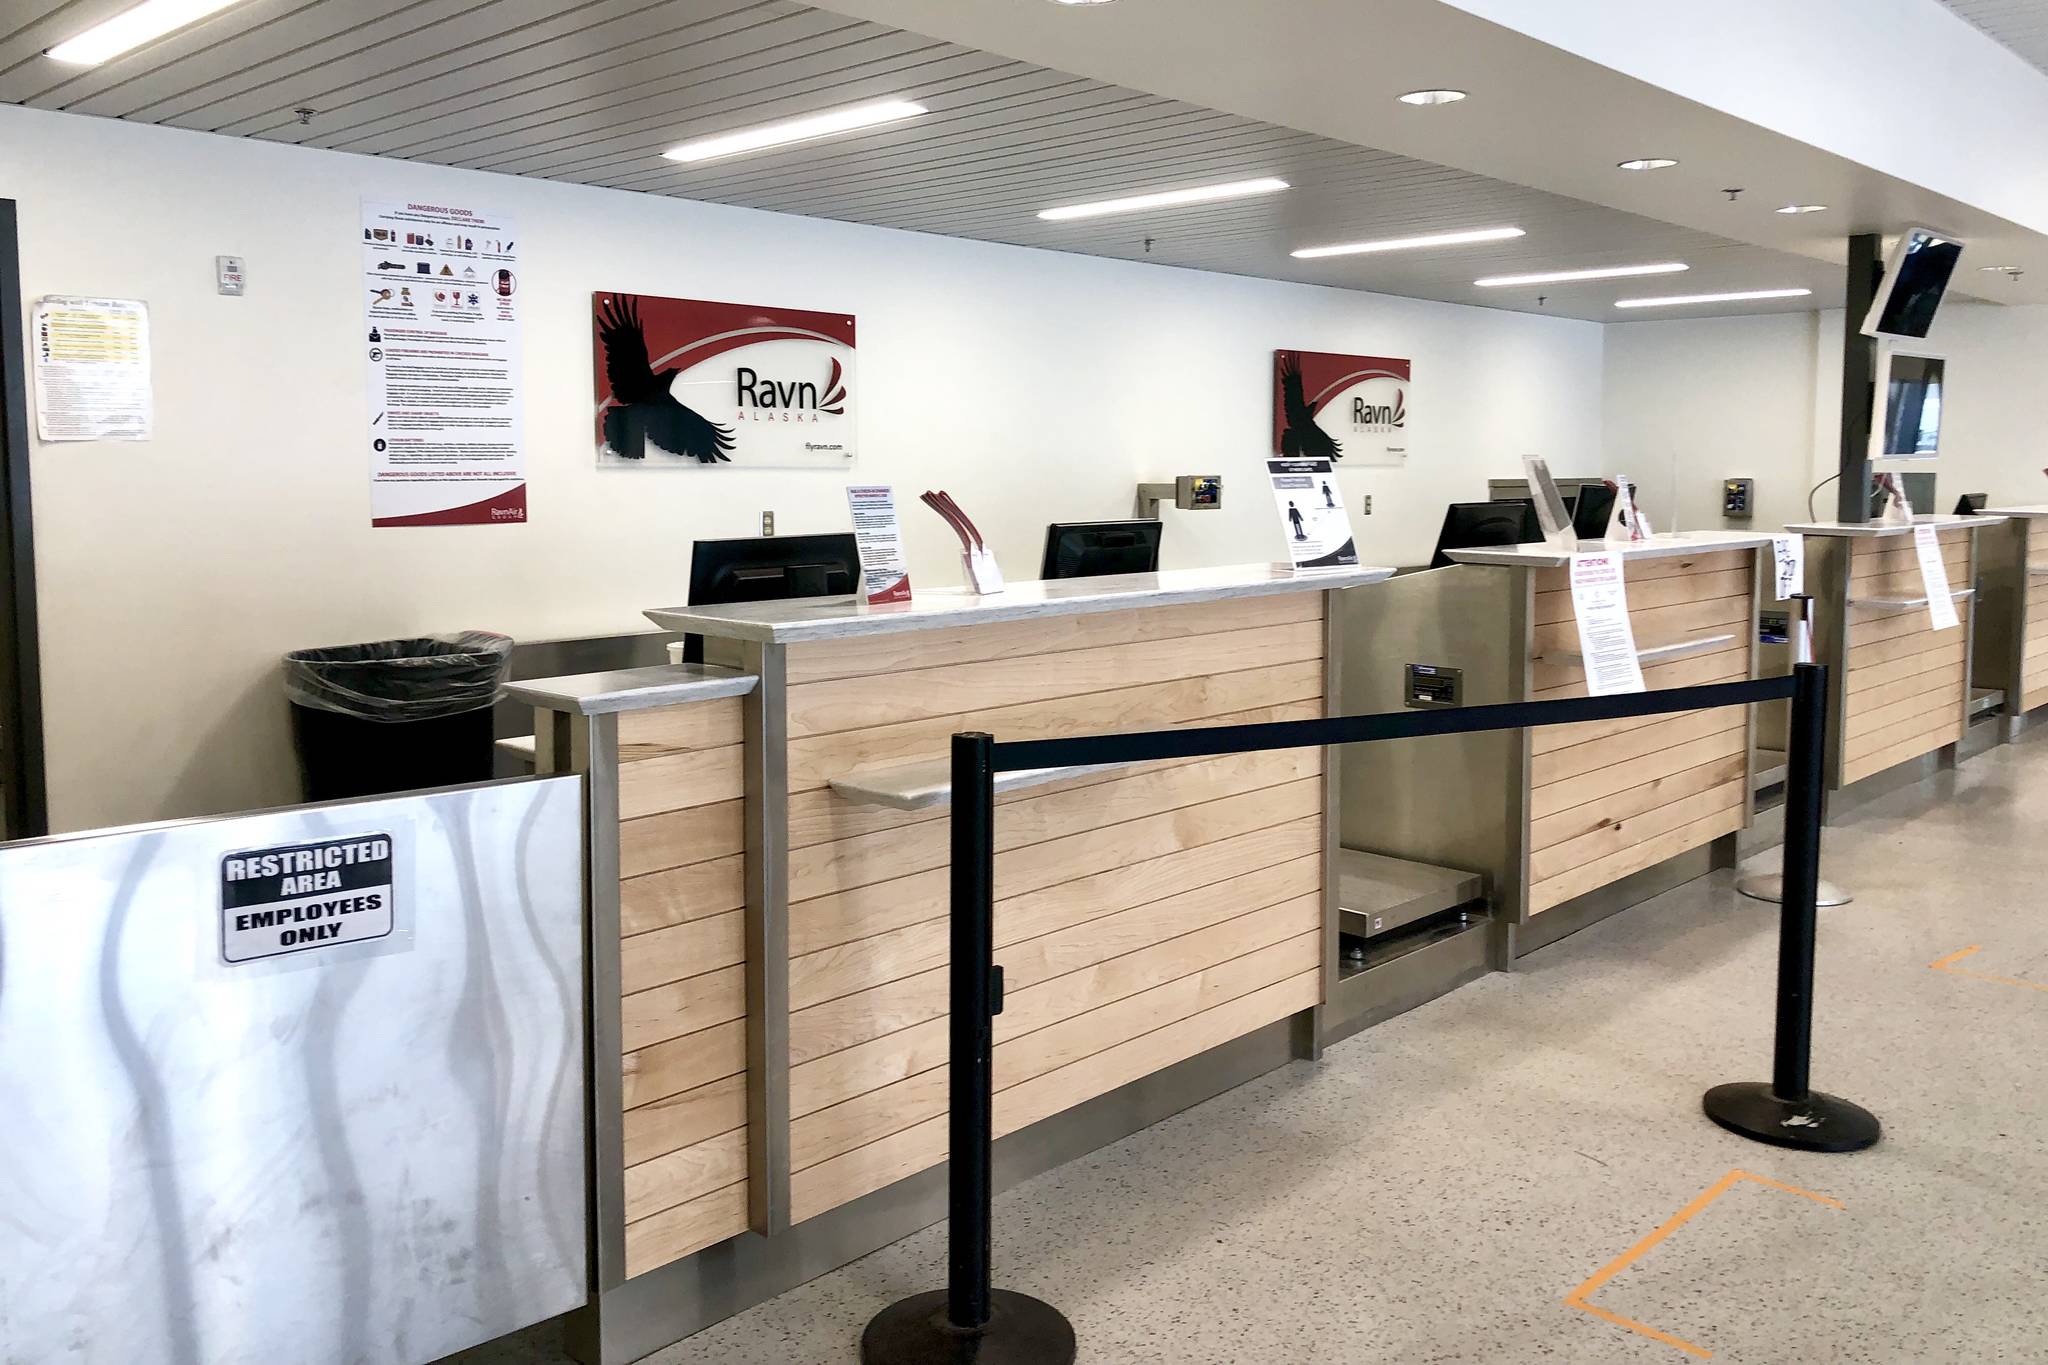 The RavnAir kiosk stands empty at the Kenai Airport on Thursday, April 2, 2020. (Photo by Victoria Petersen/Peninsula Clarion)